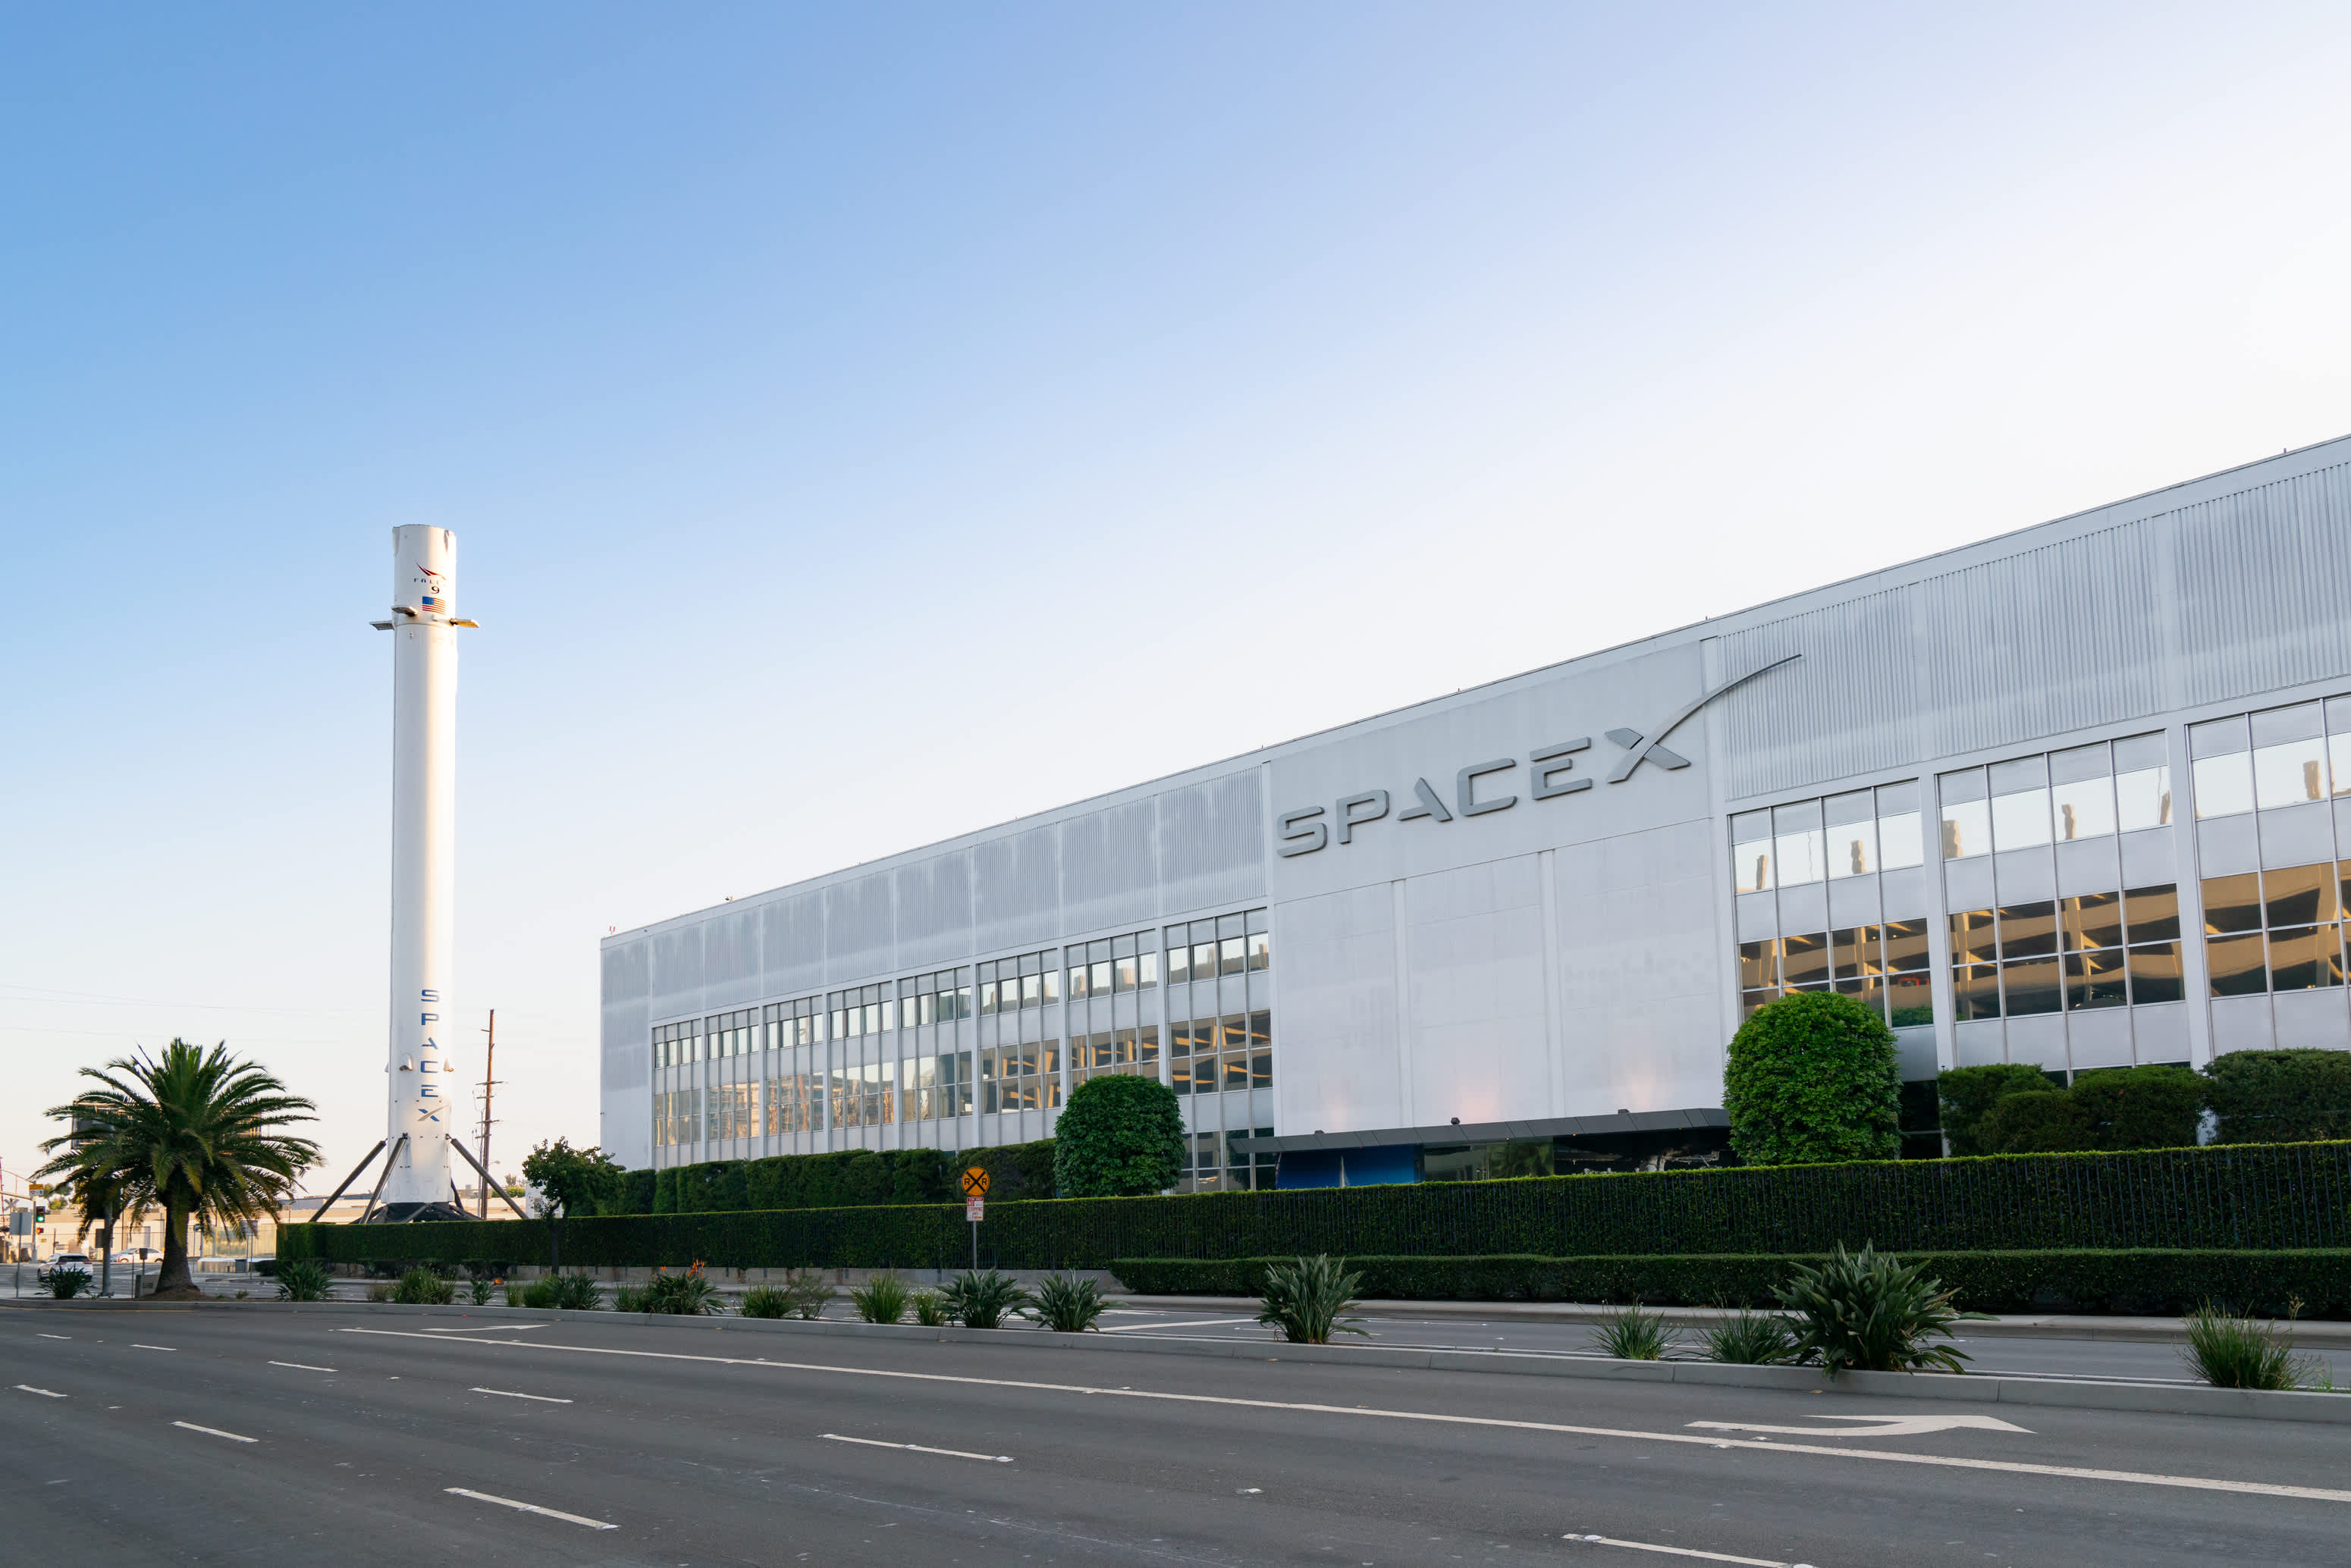 SpaceX engineer pleads guilty to DOJ insider accusations